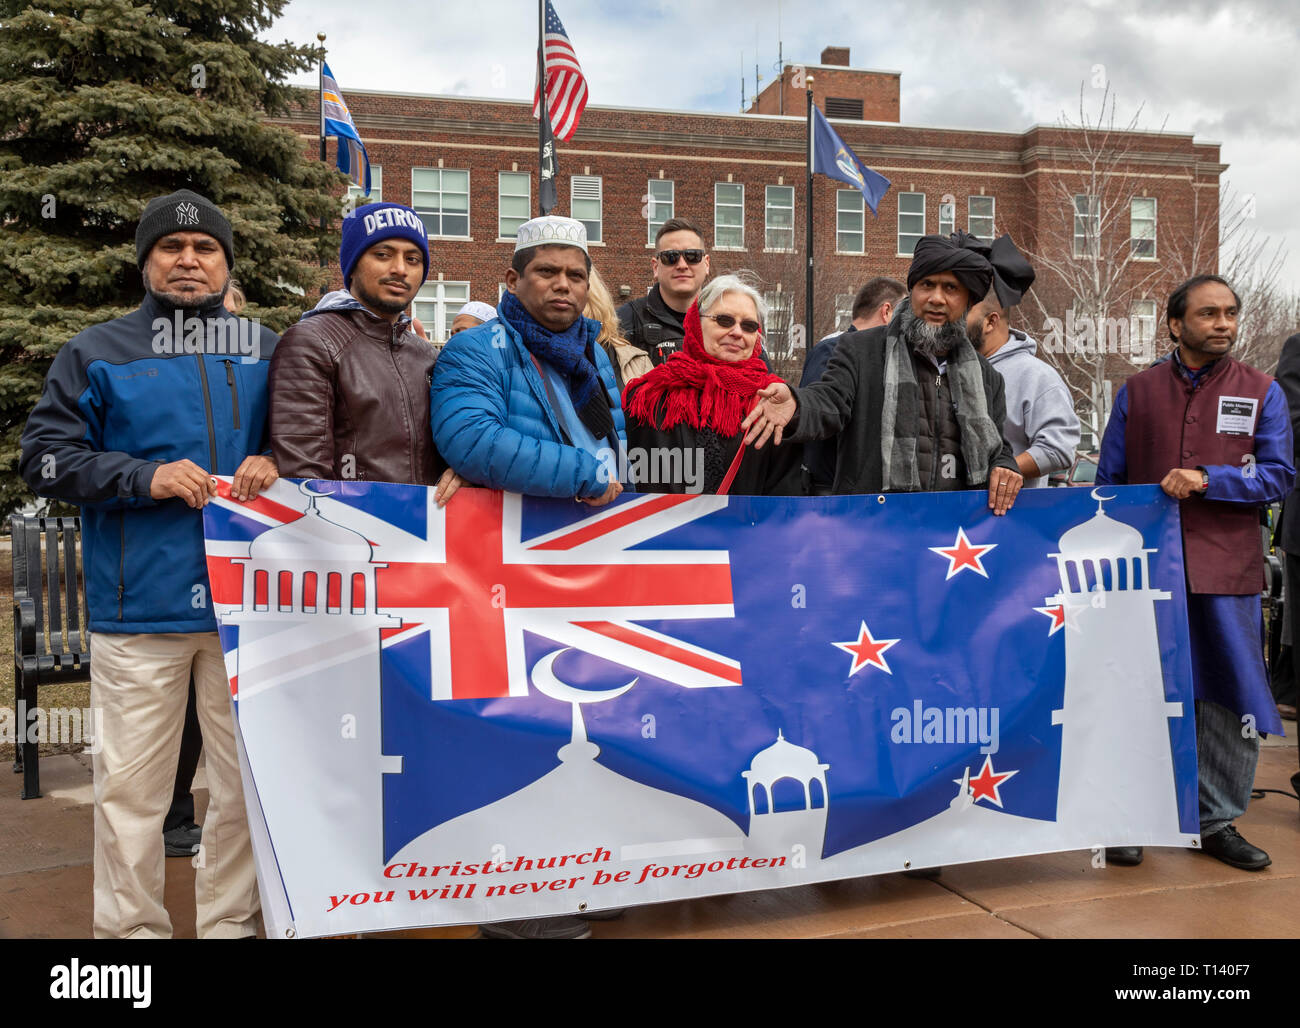 Hamtramck, Michigan, USA. 22nd Mar, 2019. A rally remembers the victims of the New Zealand mosque shootings and protests continuing Islamophobia. Hamtramck has always been a city of immigrants, most recently from Muslim countries. Credit: Jim West/Alamy Live News Stock Photo